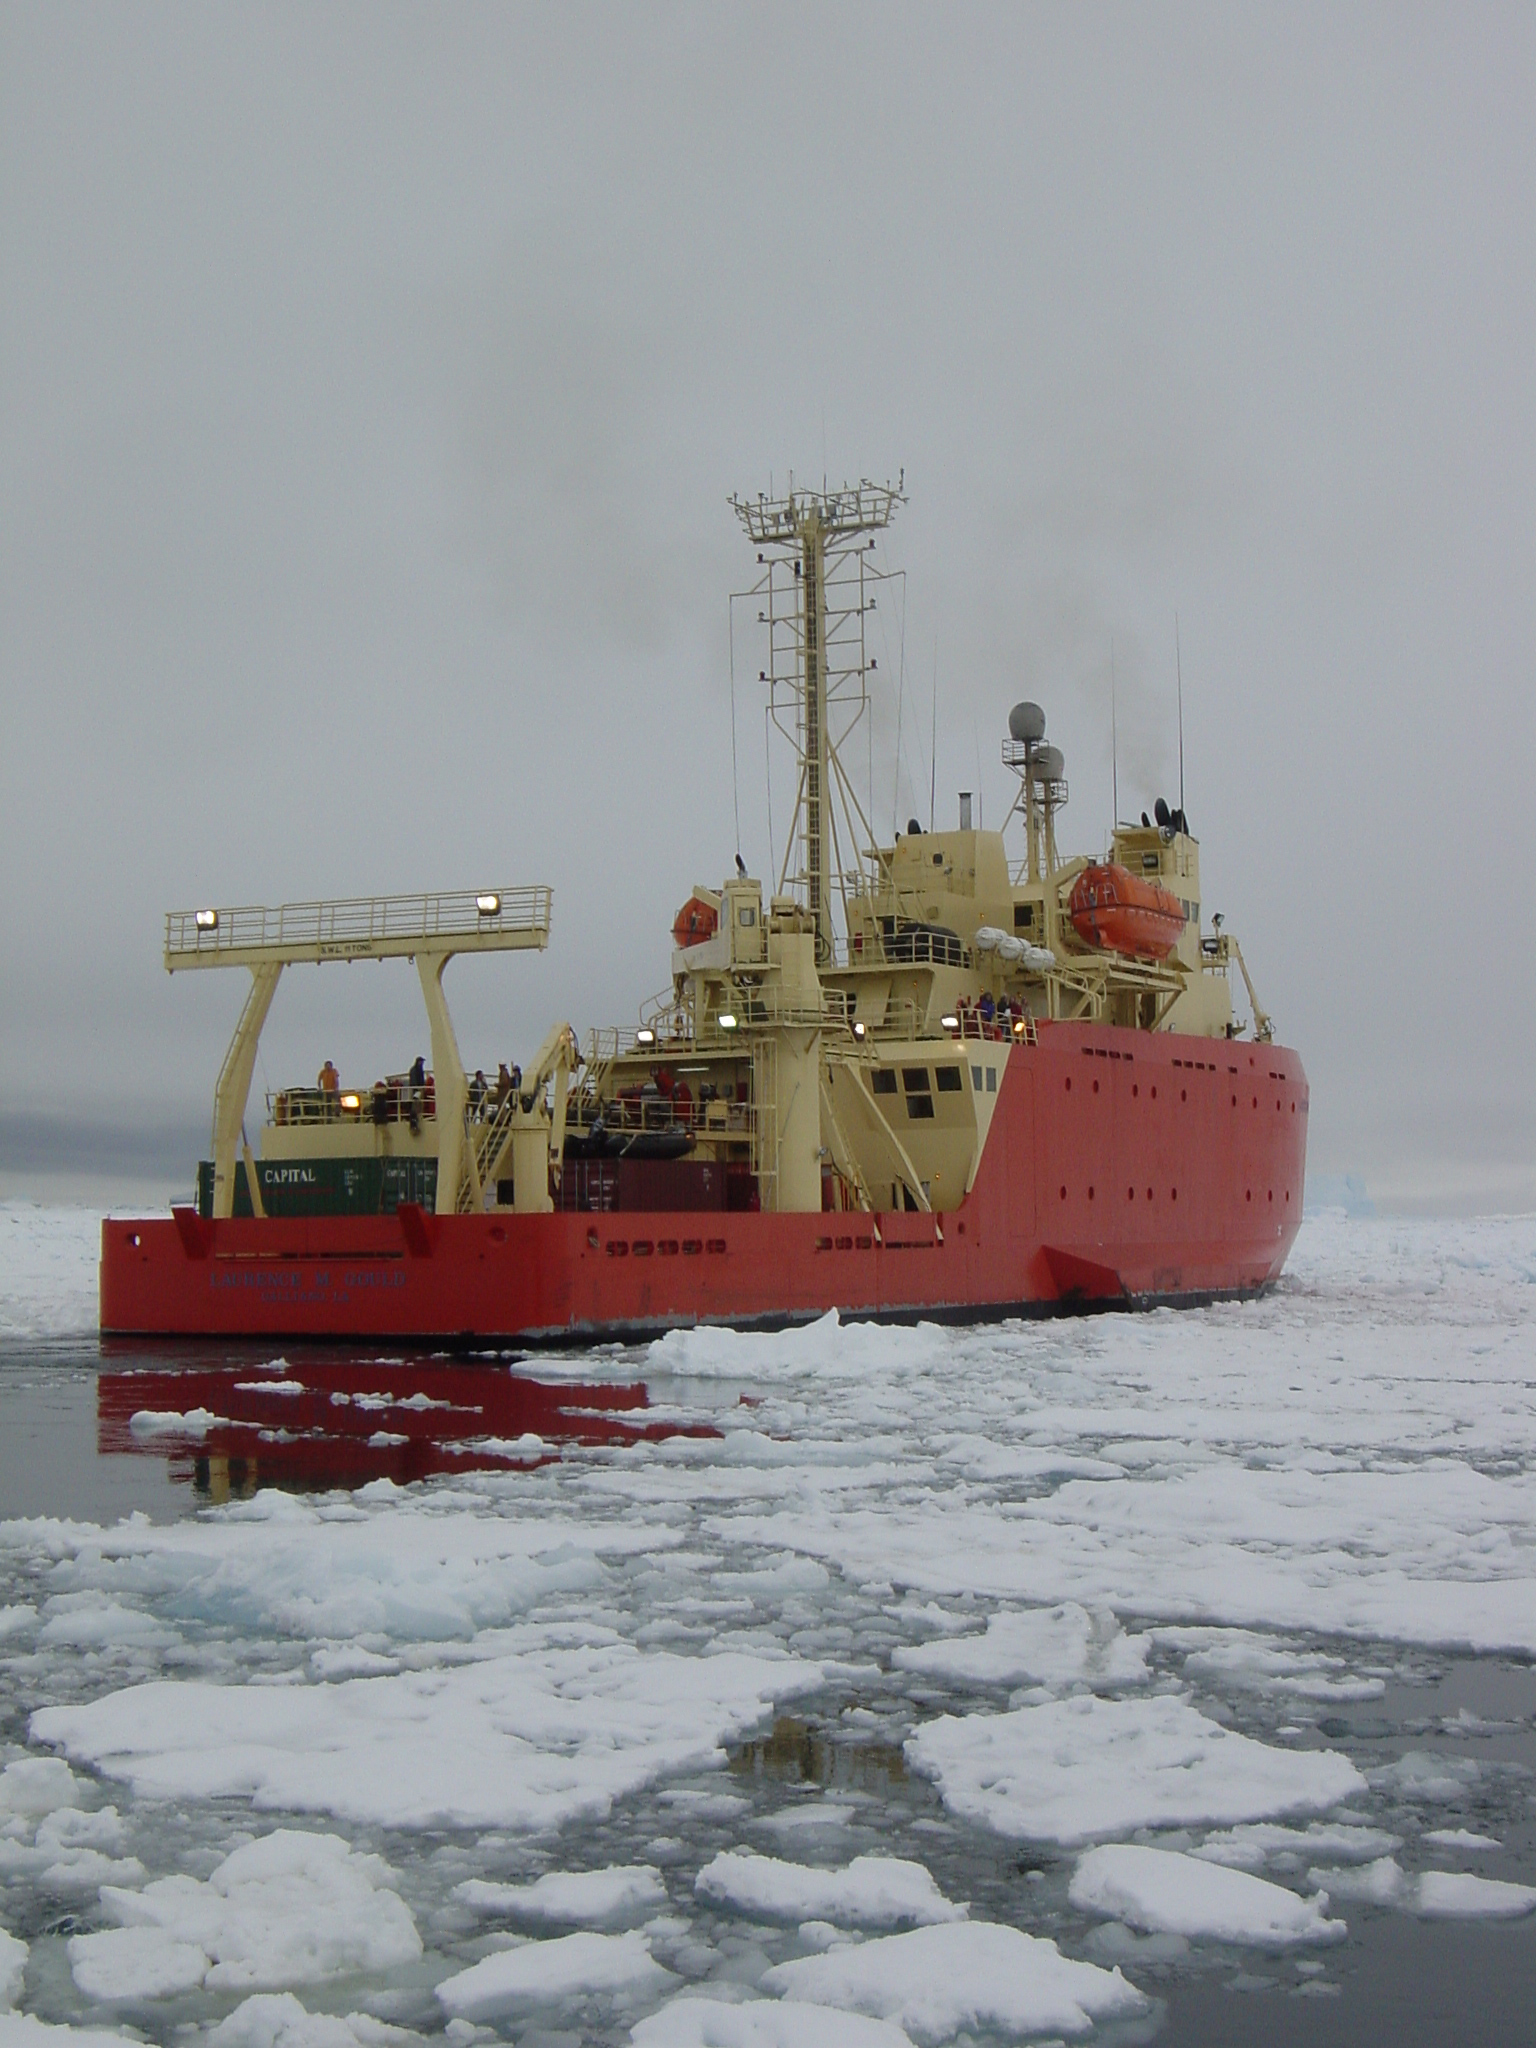 The starboard side of a red and yellow ship in icy water.